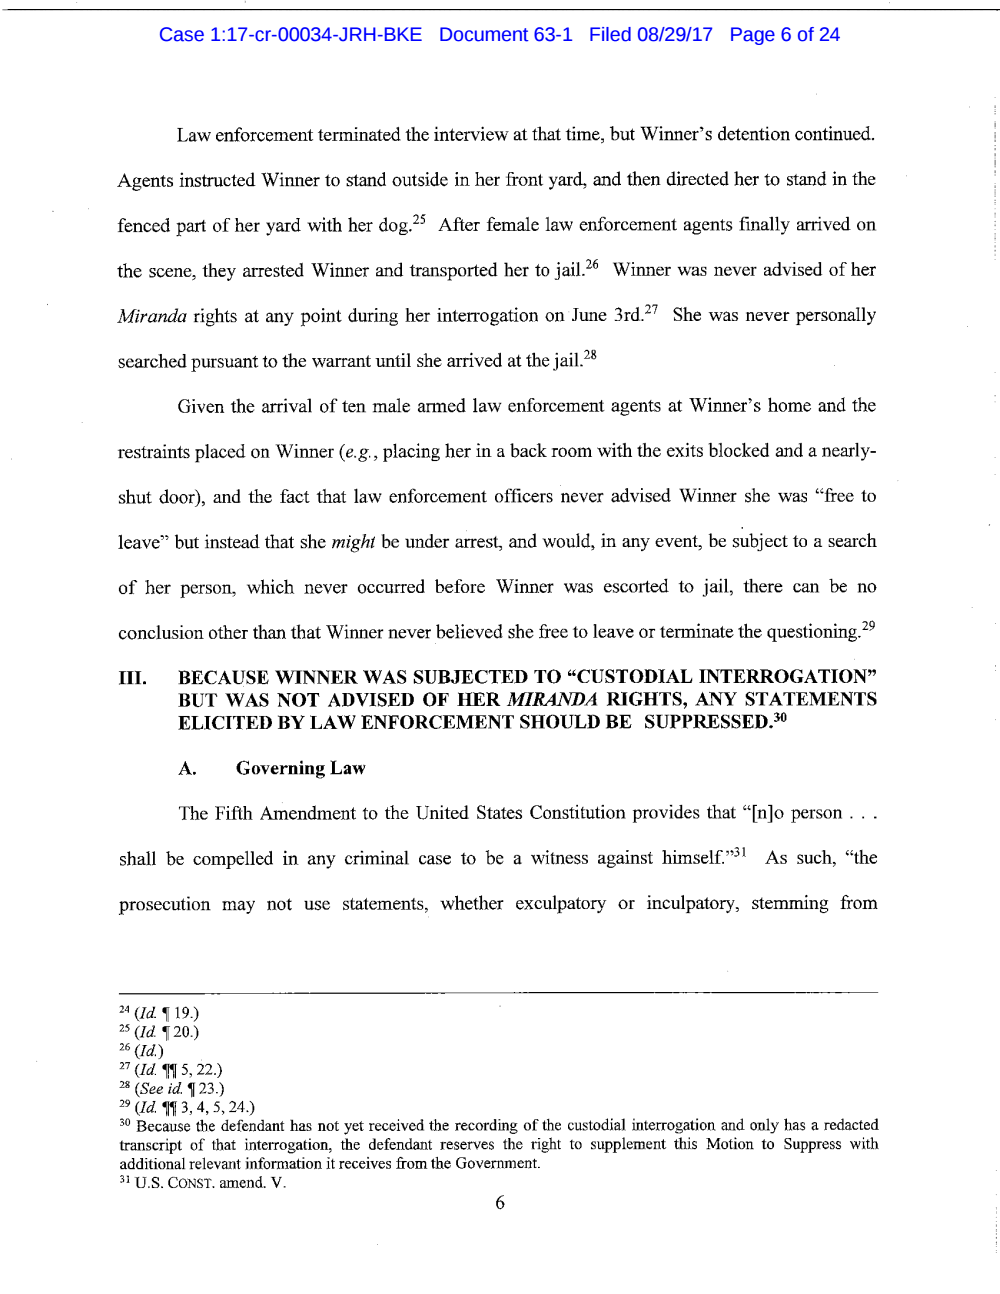 Page 6 from Reality Winner Memo in Support of Motion to Suppress